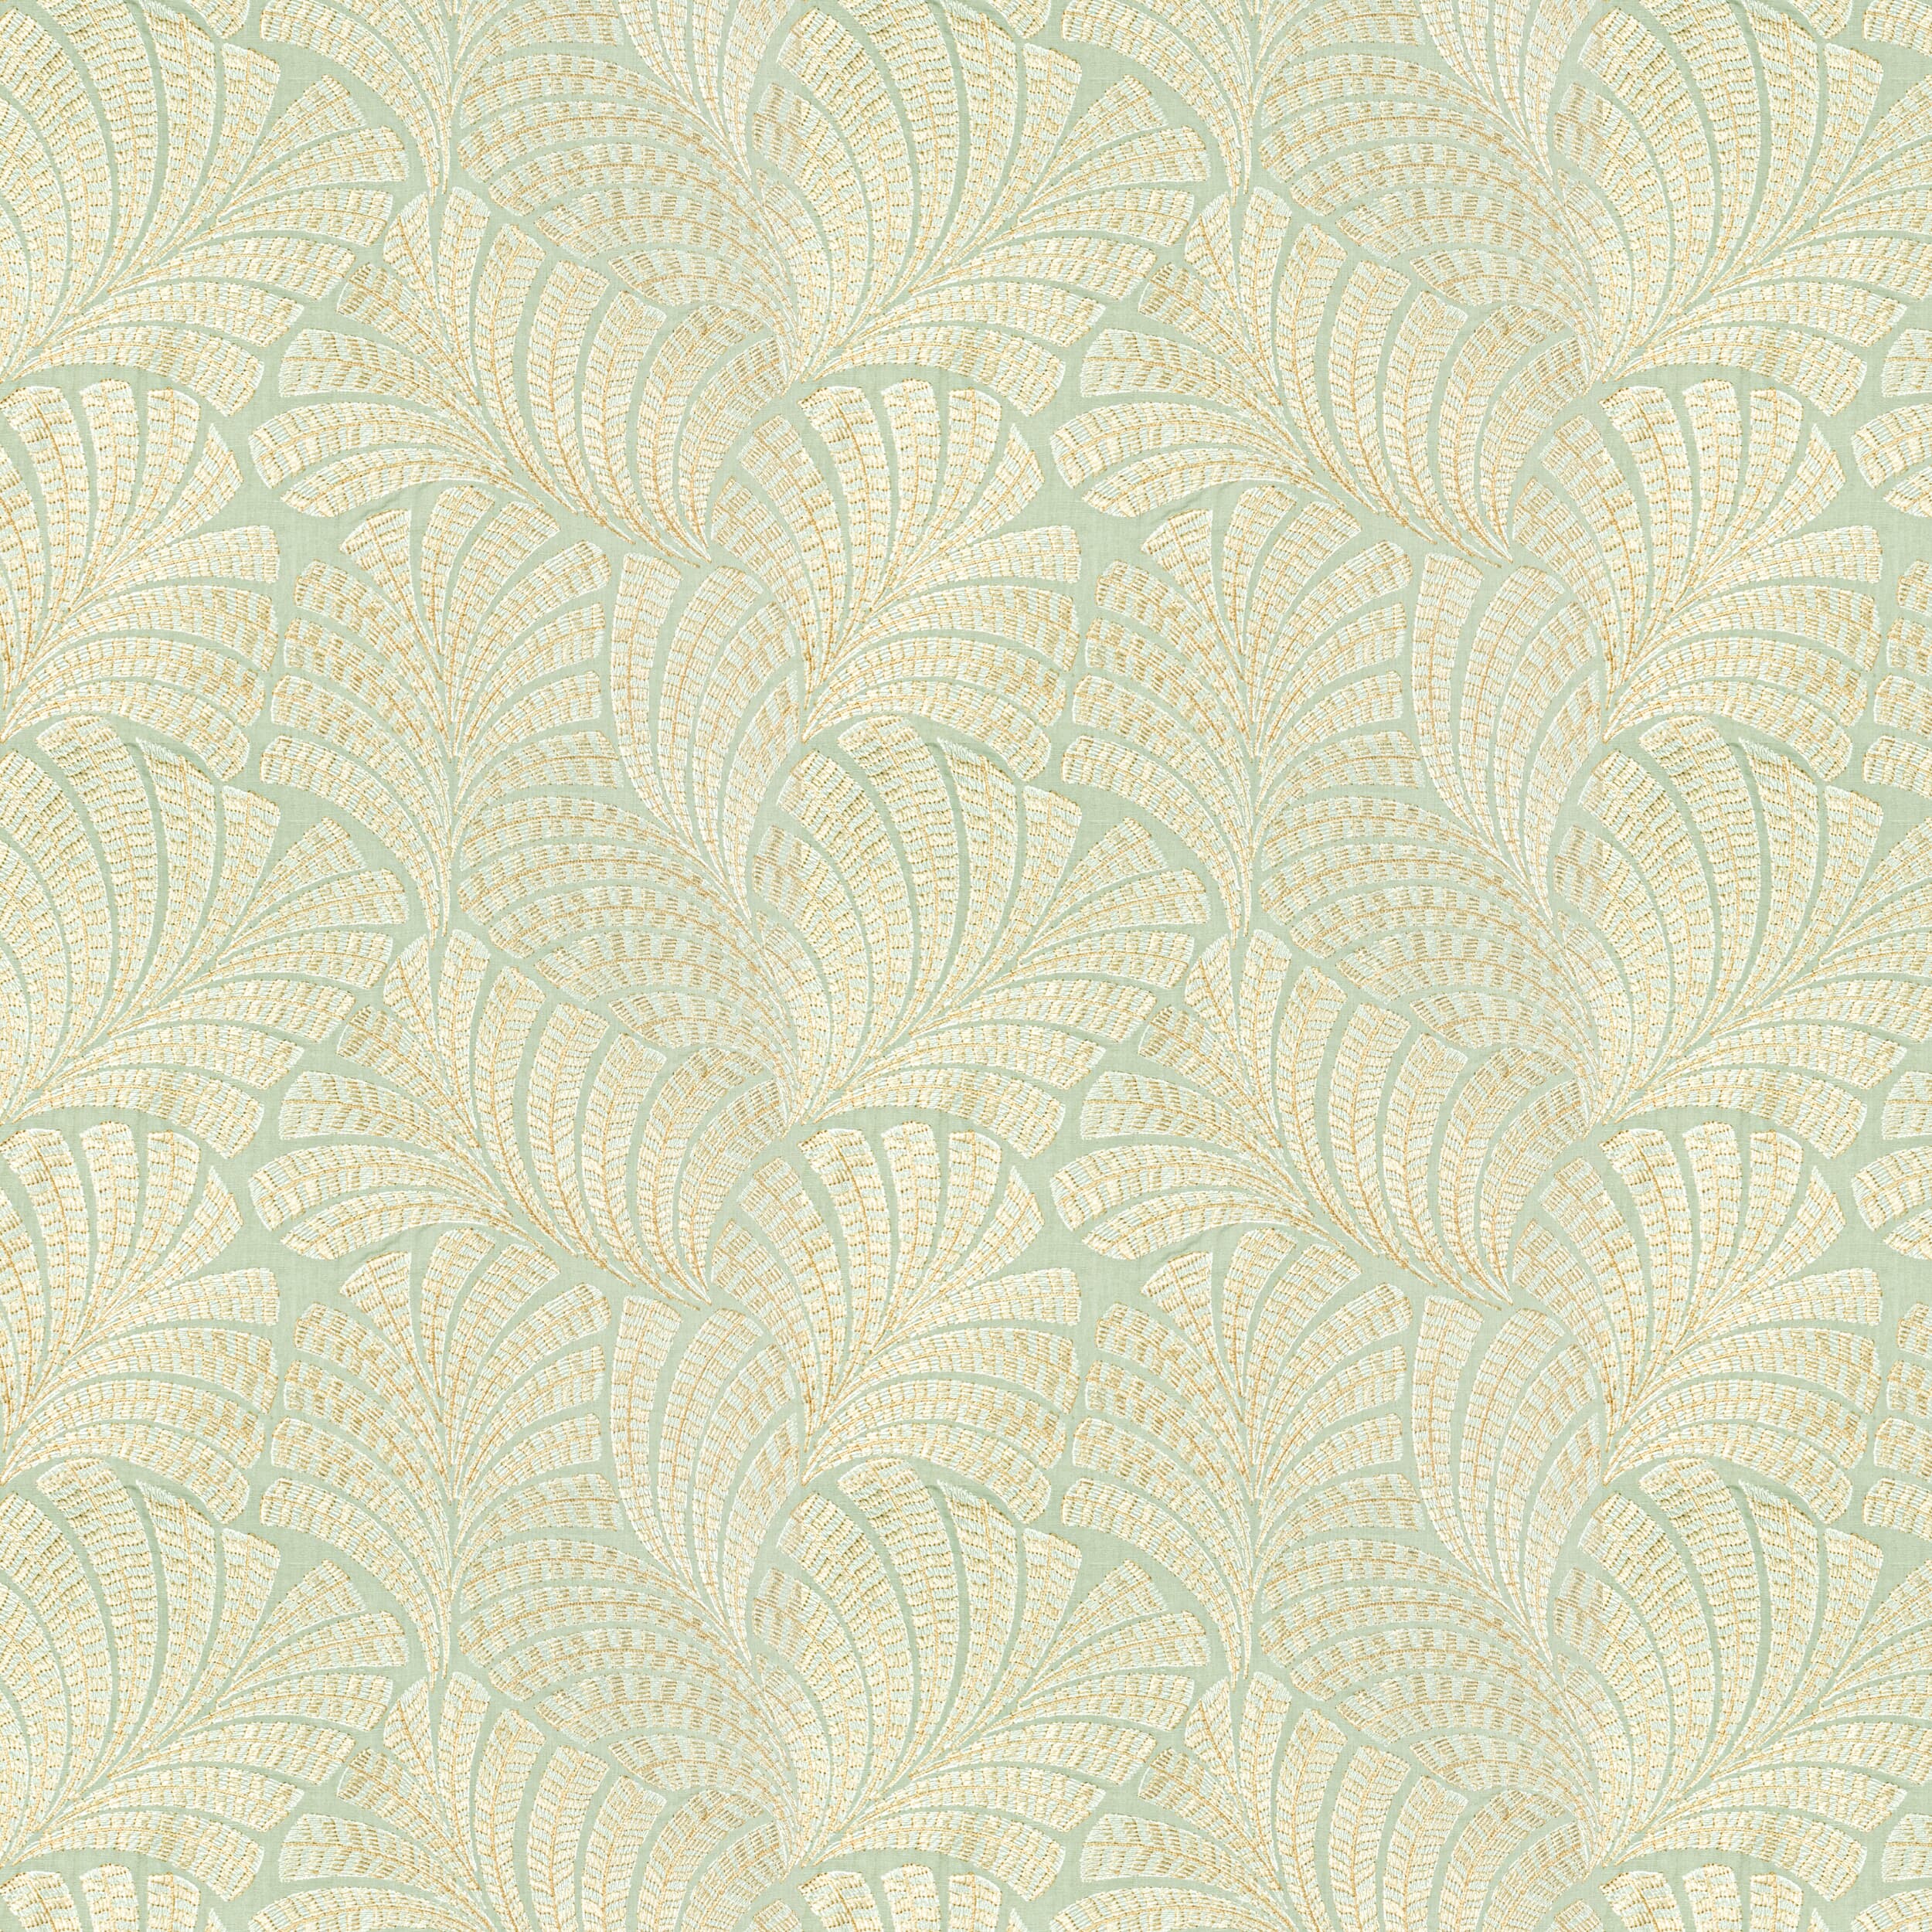 Hedges 1 Seafoam by Stout Fabric